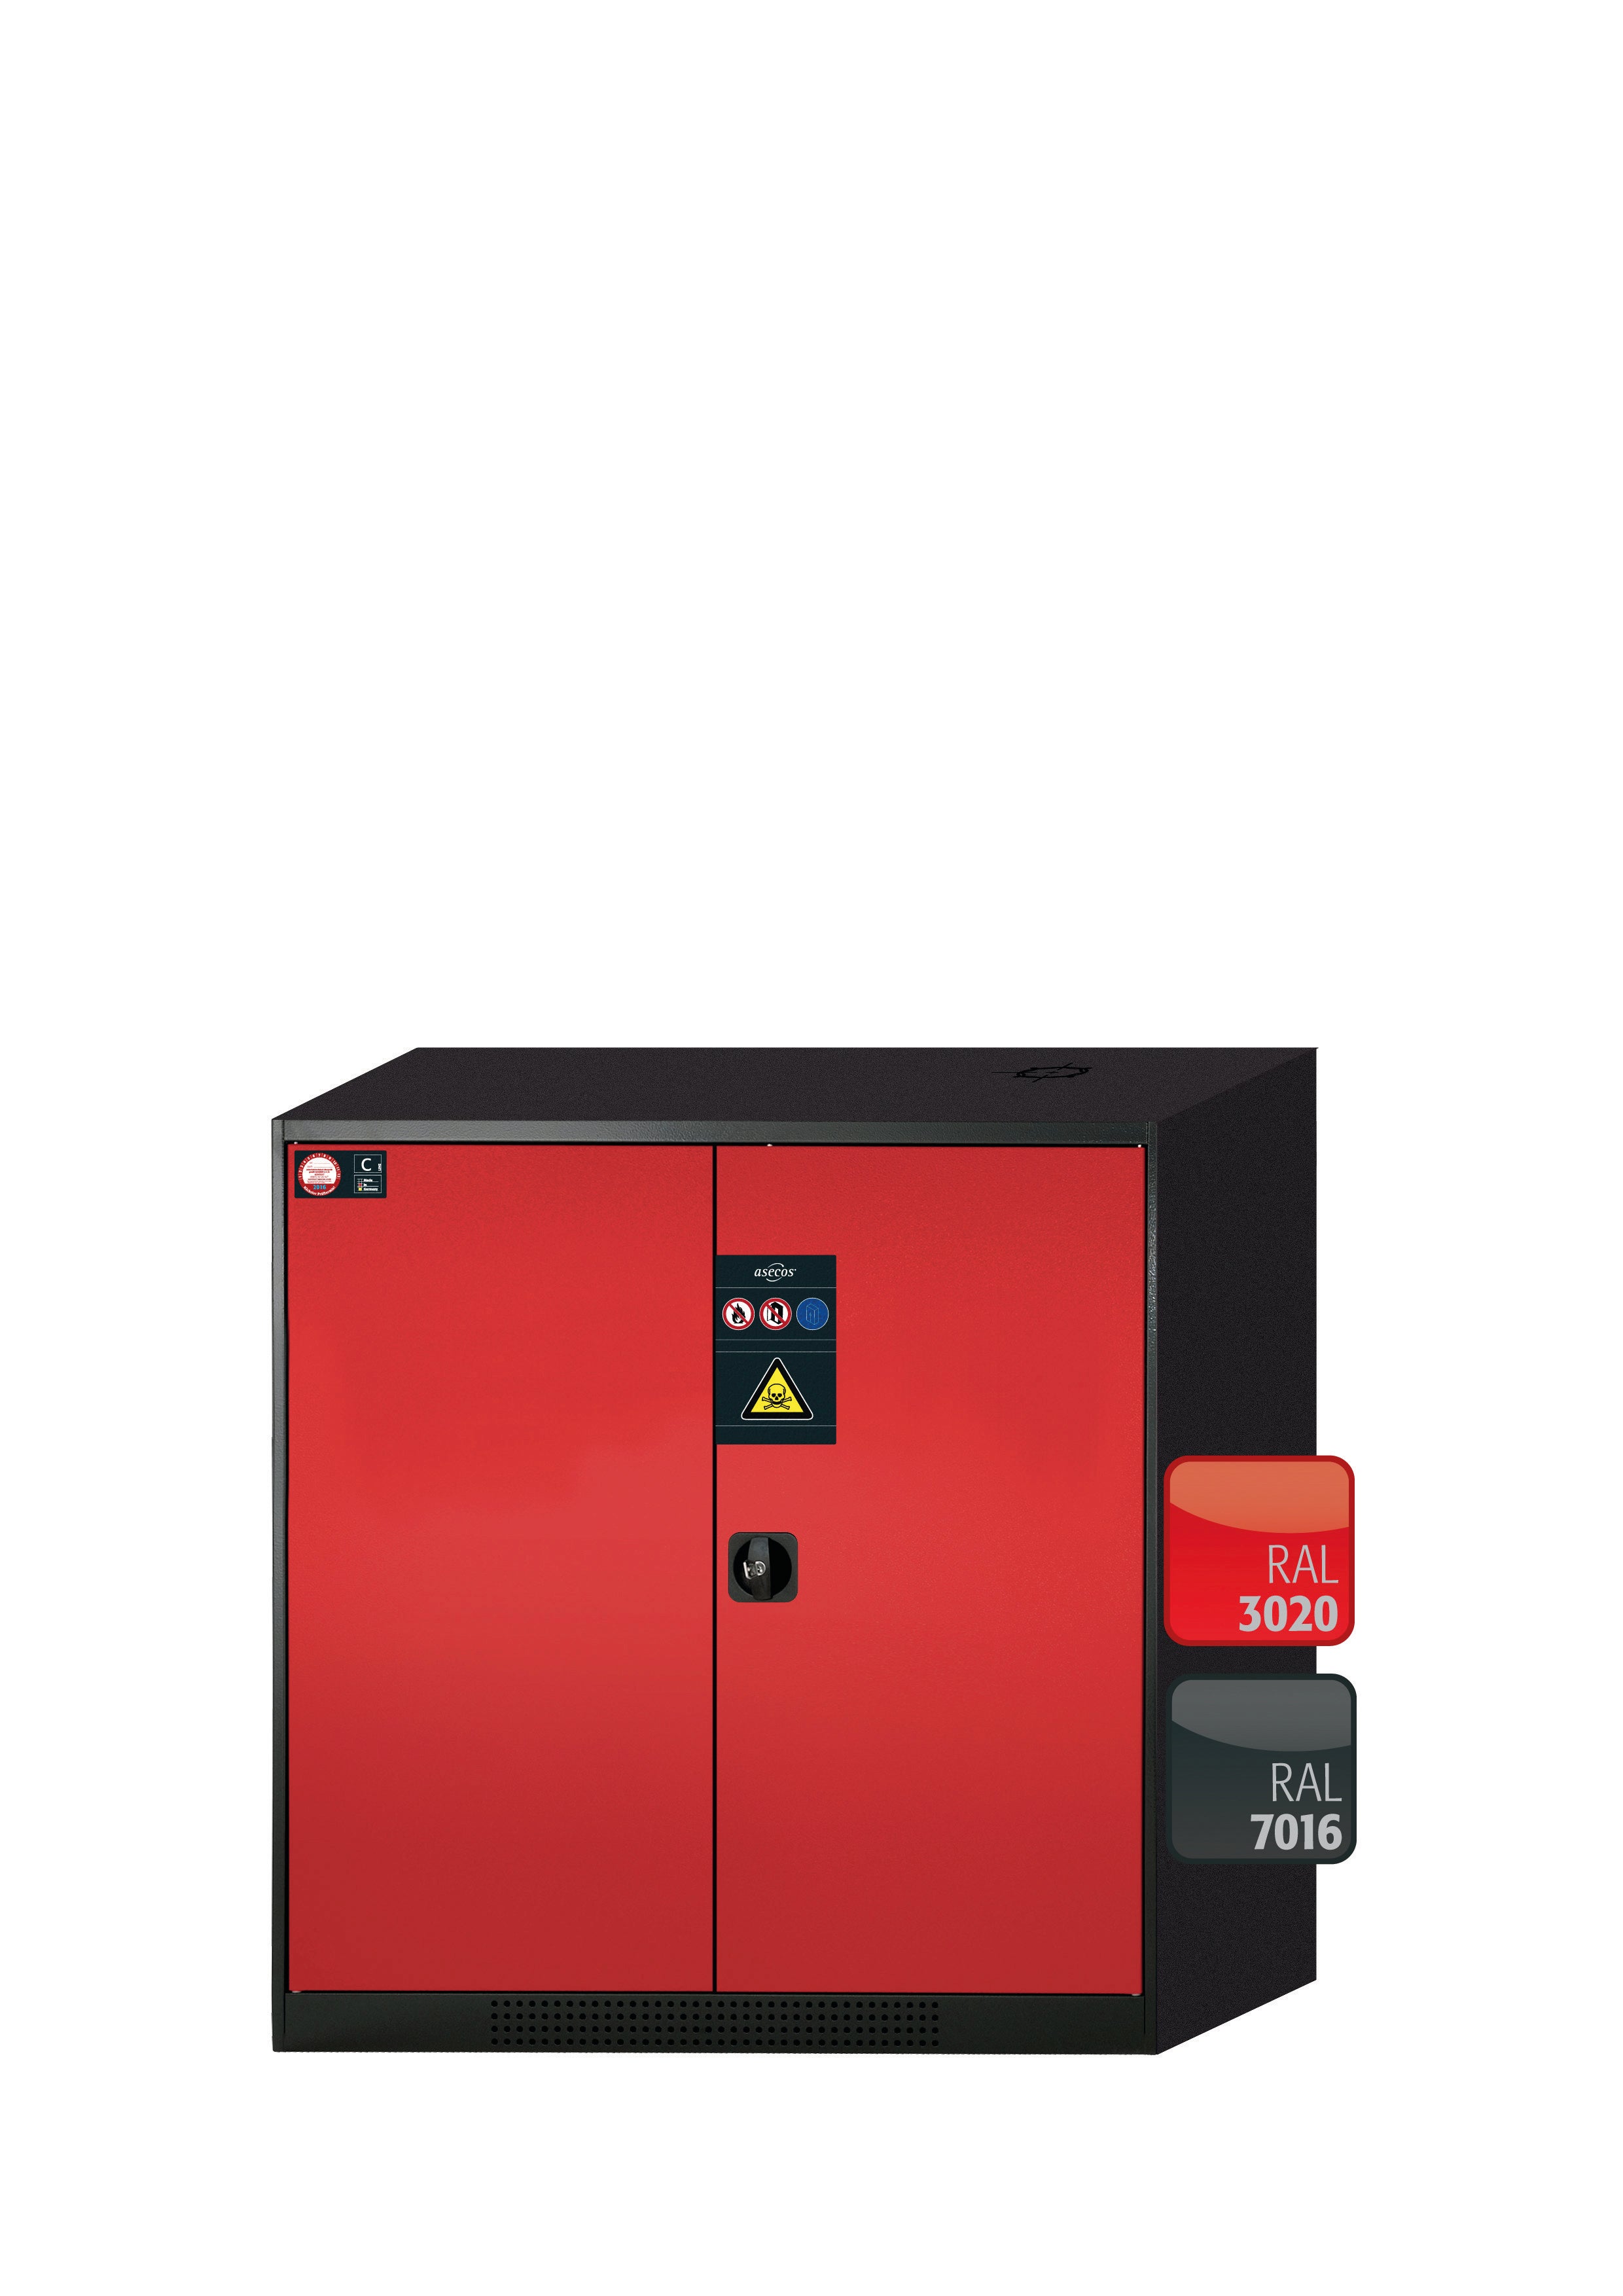 Chemical cabinet CS-CLASSIC model CS.110.105 in traffic red RAL 3020 with 2x standard shelves (sheet steel)